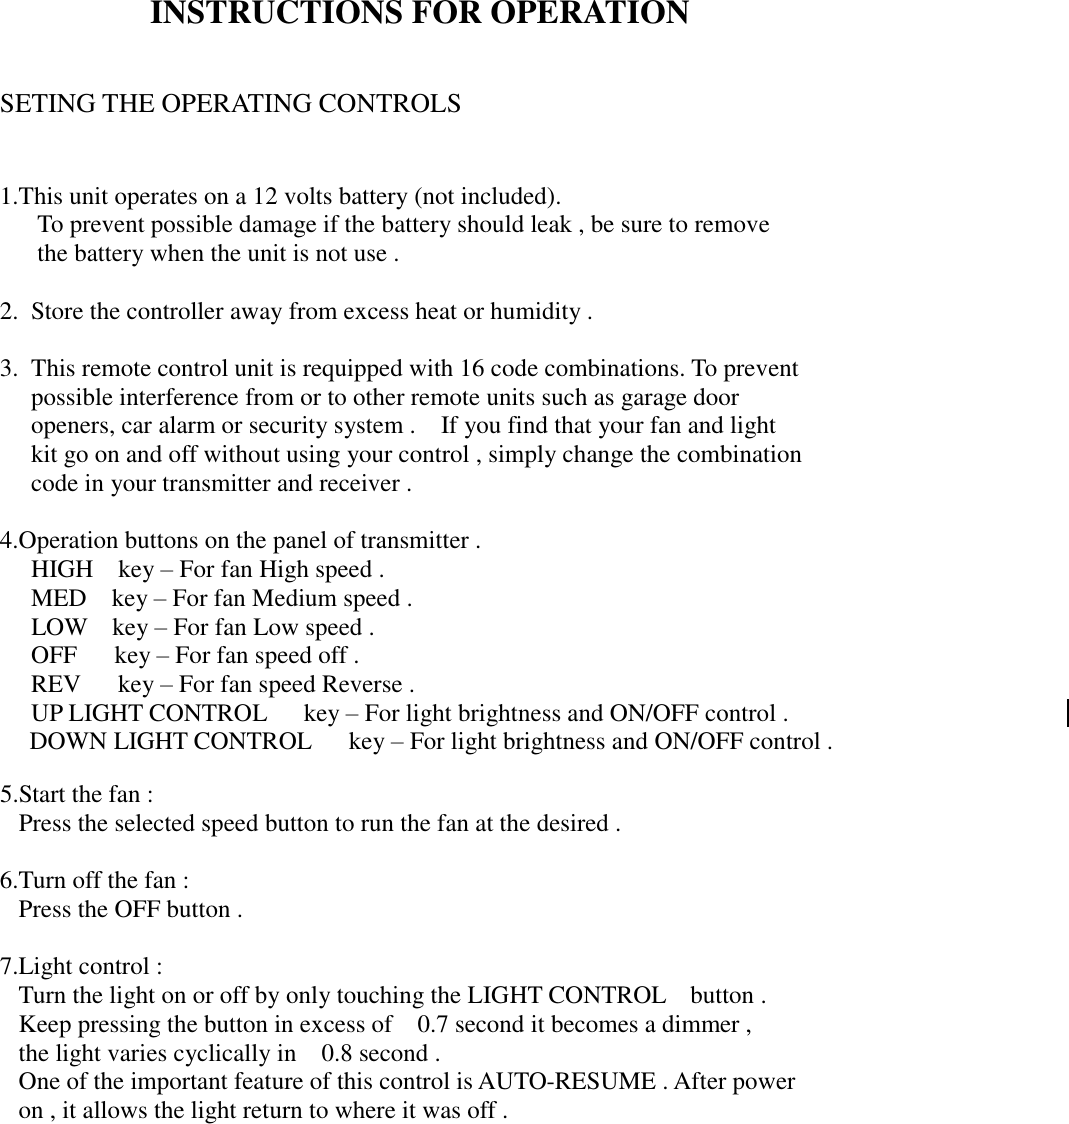 INSTRUCTIONS FOR OPERATION    SETING THE OPERATING CONTROLS   1.This unit operates on a 12 volts battery (not included).    To prevent possible damage if the battery should leak , be sure to remove    the battery when the unit is not use .  2. Store the controller away from excess heat or humidity .  3. This remote control unit is requipped with 16 code combinations. To prevent  possible interference from or to other remote units such as garage door  openers, car alarm or security system .  If you find that your fan and light    kit go on and off without using your control , simply change the combination  code in your transmitter and receiver .  4.Operation buttons on the panel of transmitter .  HIGH  key – For fan High speed .  MED  key – For fan Medium speed .  LOW   key – For fan Low speed .  OFF   key – For fan speed off .  REV   key – For fan speed Reverse .   UP LIGHT CONTROL   key – For light brightness and ON/OFF control . DOWN LIGHT CONTROL   key – For light brightness and ON/OFF control .  5.Start the fan : Press the selected speed button to run the fan at the desired .  6.Turn off the fan : Press the OFF button .  7.Light control : Turn the light on or off by only touching the LIGHT CONTROL  button . Keep pressing the button in excess of  0.7 second it becomes a dimmer , the light varies cyclically in  0.8 second . One of the important feature of this control is AUTO-RESUME . After power   on , it allows the light return to where it was off .              Page : 3-